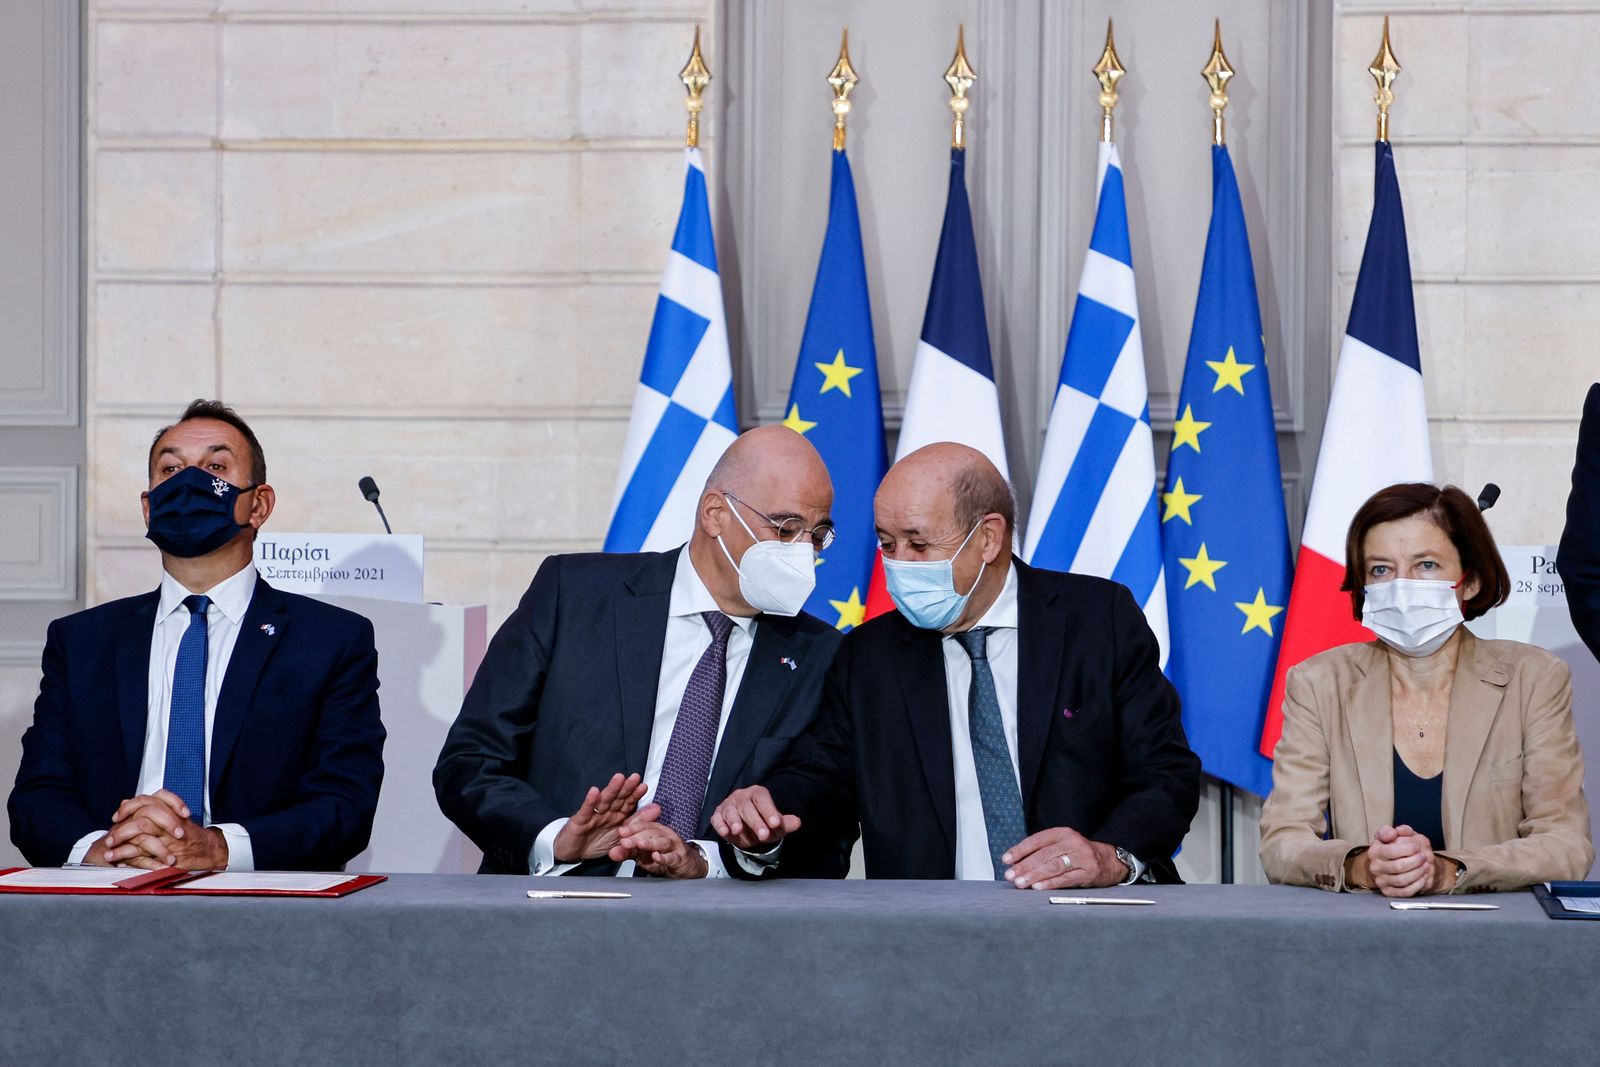 (fromL) Greek Defence Minister Nikolaos Panagiotopoulos, Greek Foreign Affairs Minister Nikos Dendias, French Foreign Affairs Minister Jean-Yves Le Drian and French Defence Minister Florence Parly take part in the signing ceremony of a new defence deal at The Elysee Palace in Paris on September 28, 2021. - Greece will buy three frigates from France as part of a deeper 